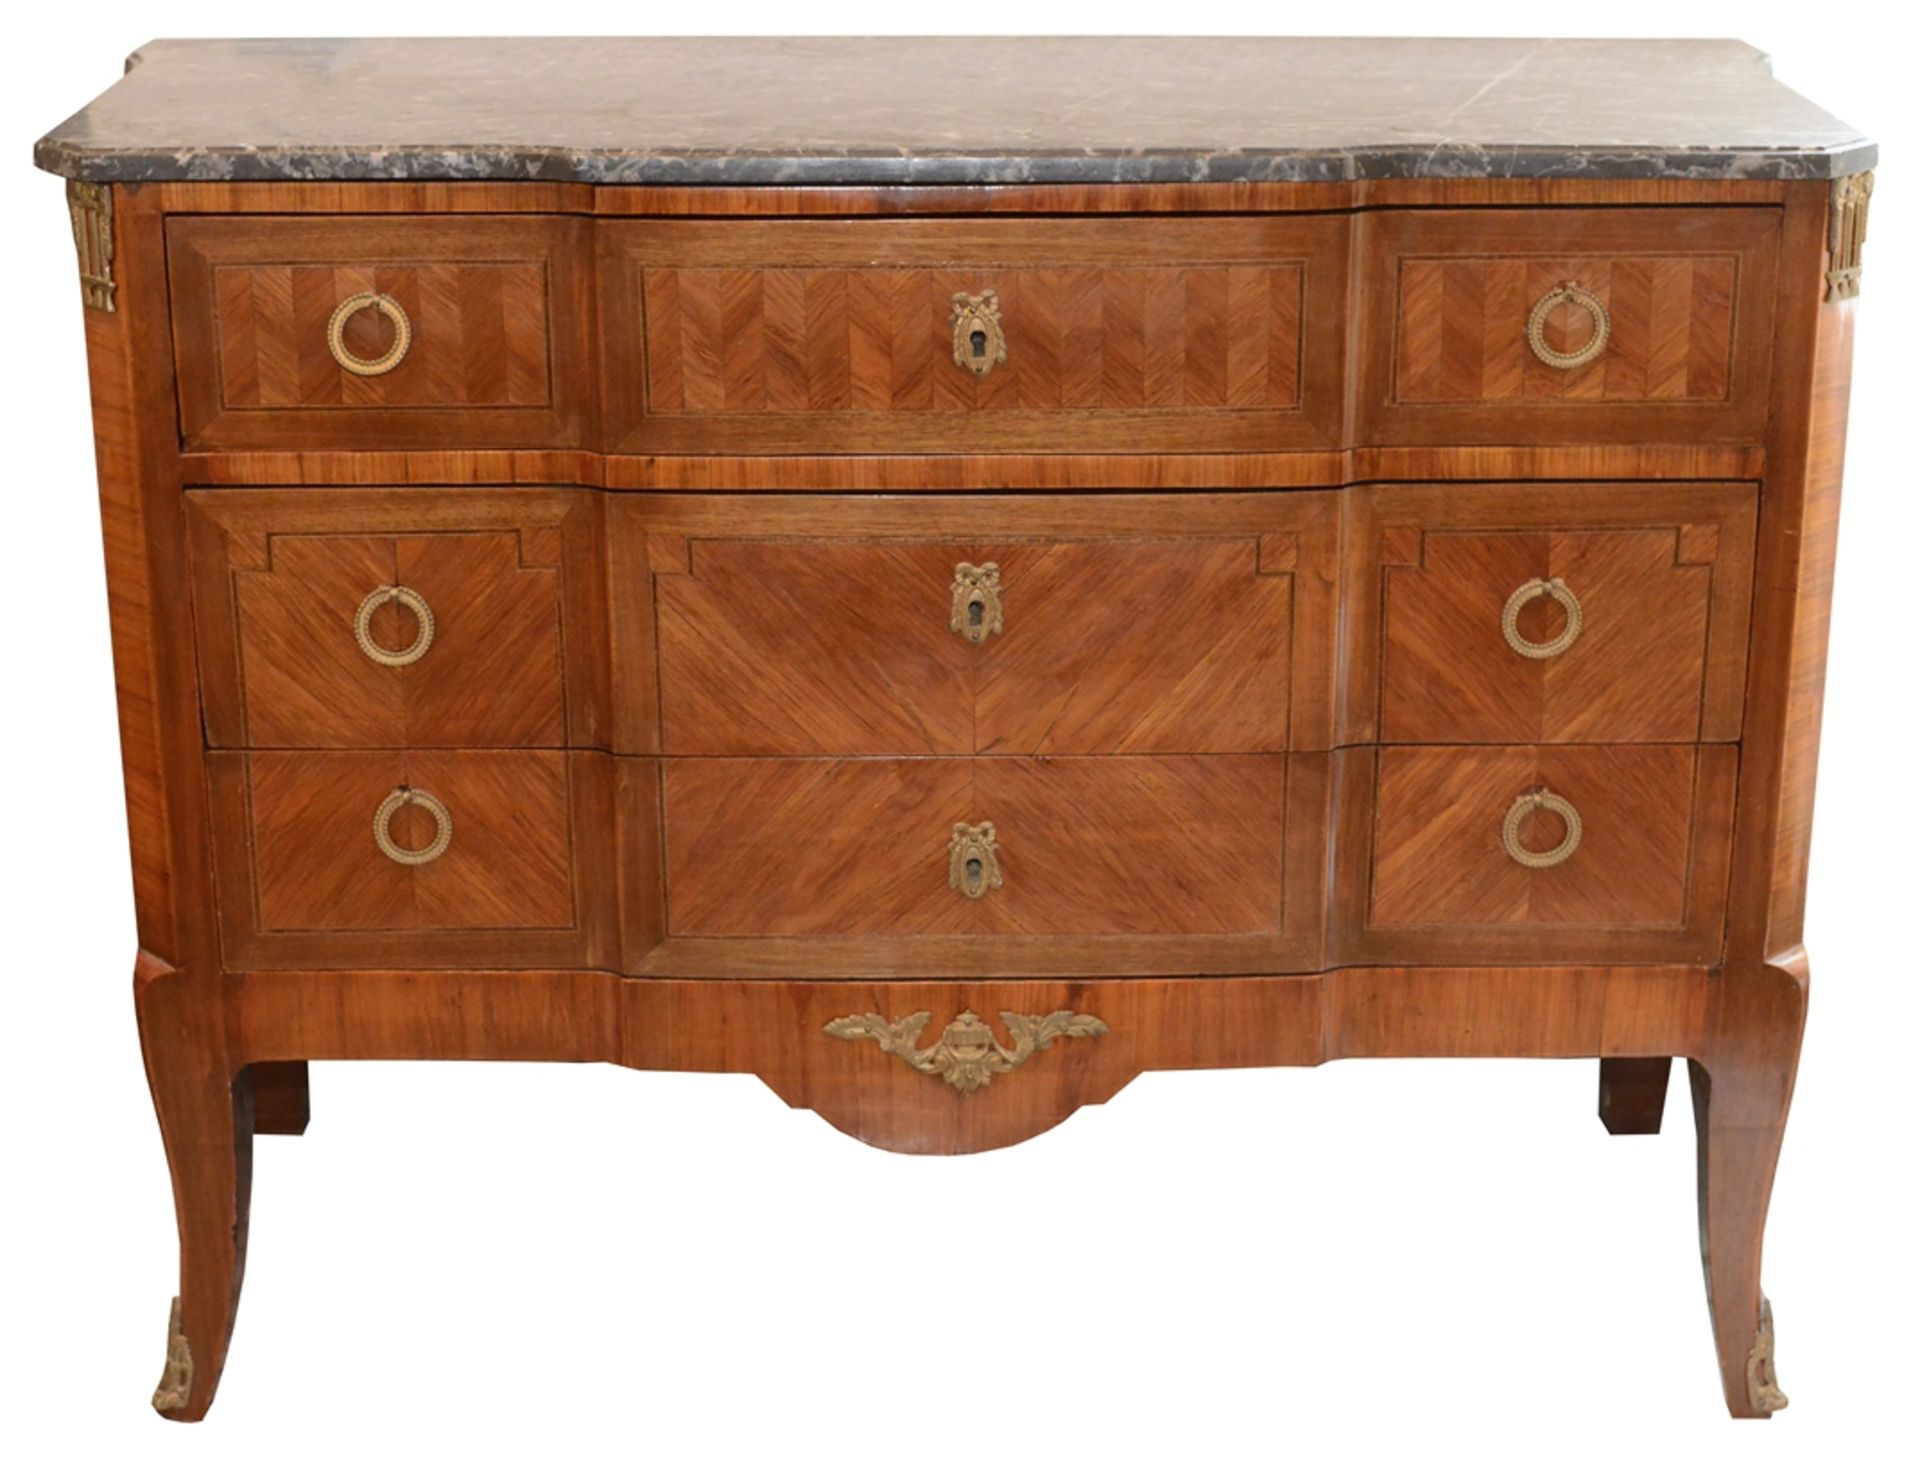 Chest of drawers, classicist style, with three graduated drawers, front and sides crafted with line